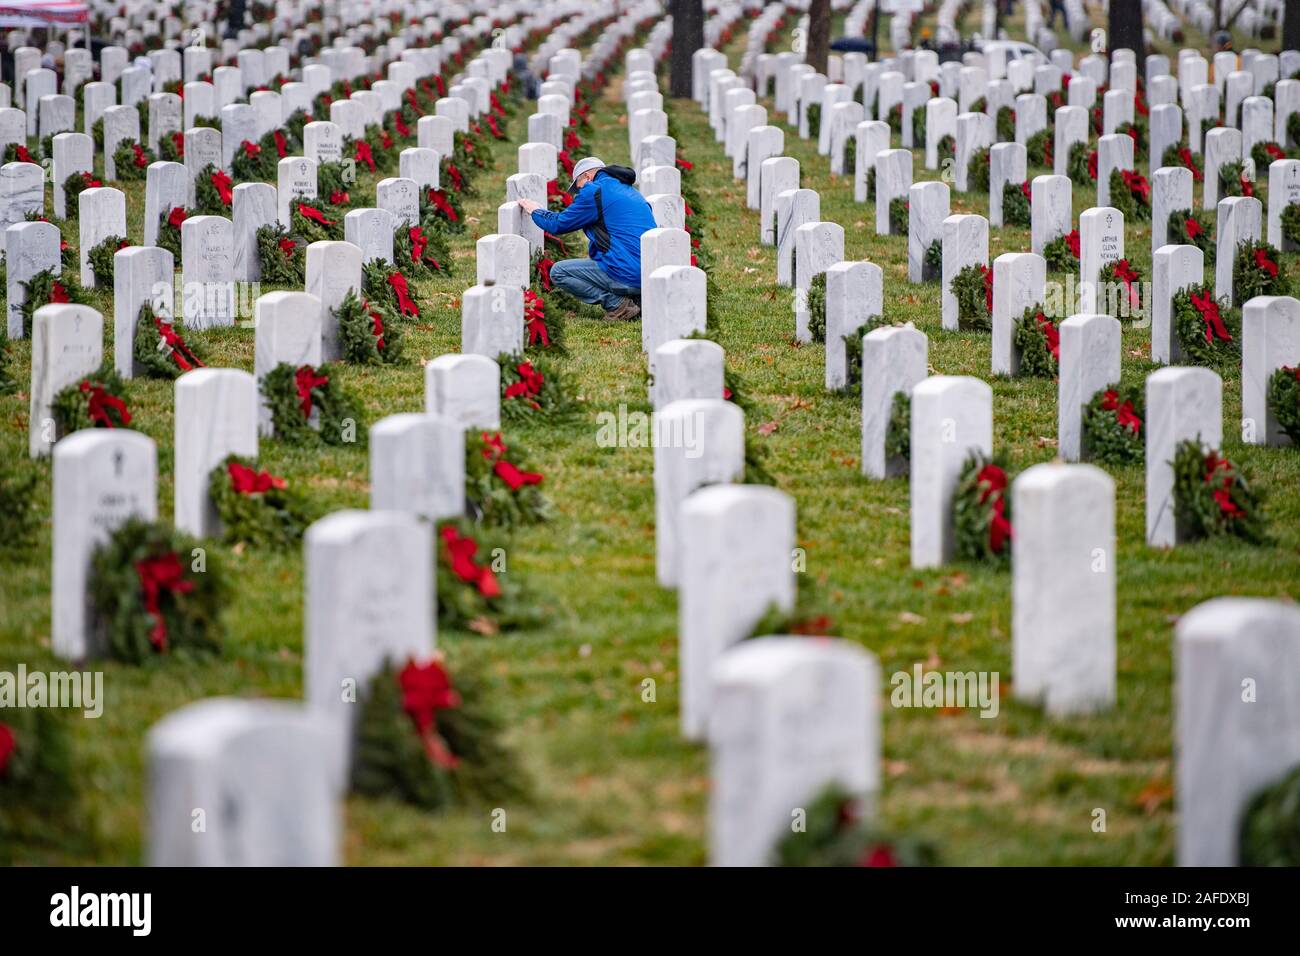 Arlington, United States of America. 14 December, 2019. A man pauses at a gravesite of a fallen service member during the 28th Wreaths Across America Day at Arlington National Cemetery December 14, 2019 in Arlington, Virginia. More than 38,000 volunteers place wreaths at every gravesite at Arlington National Cemetery and other sites around the nation.  Credit: Elizabeth Fraser/DOD/Alamy Live News Stock Photo